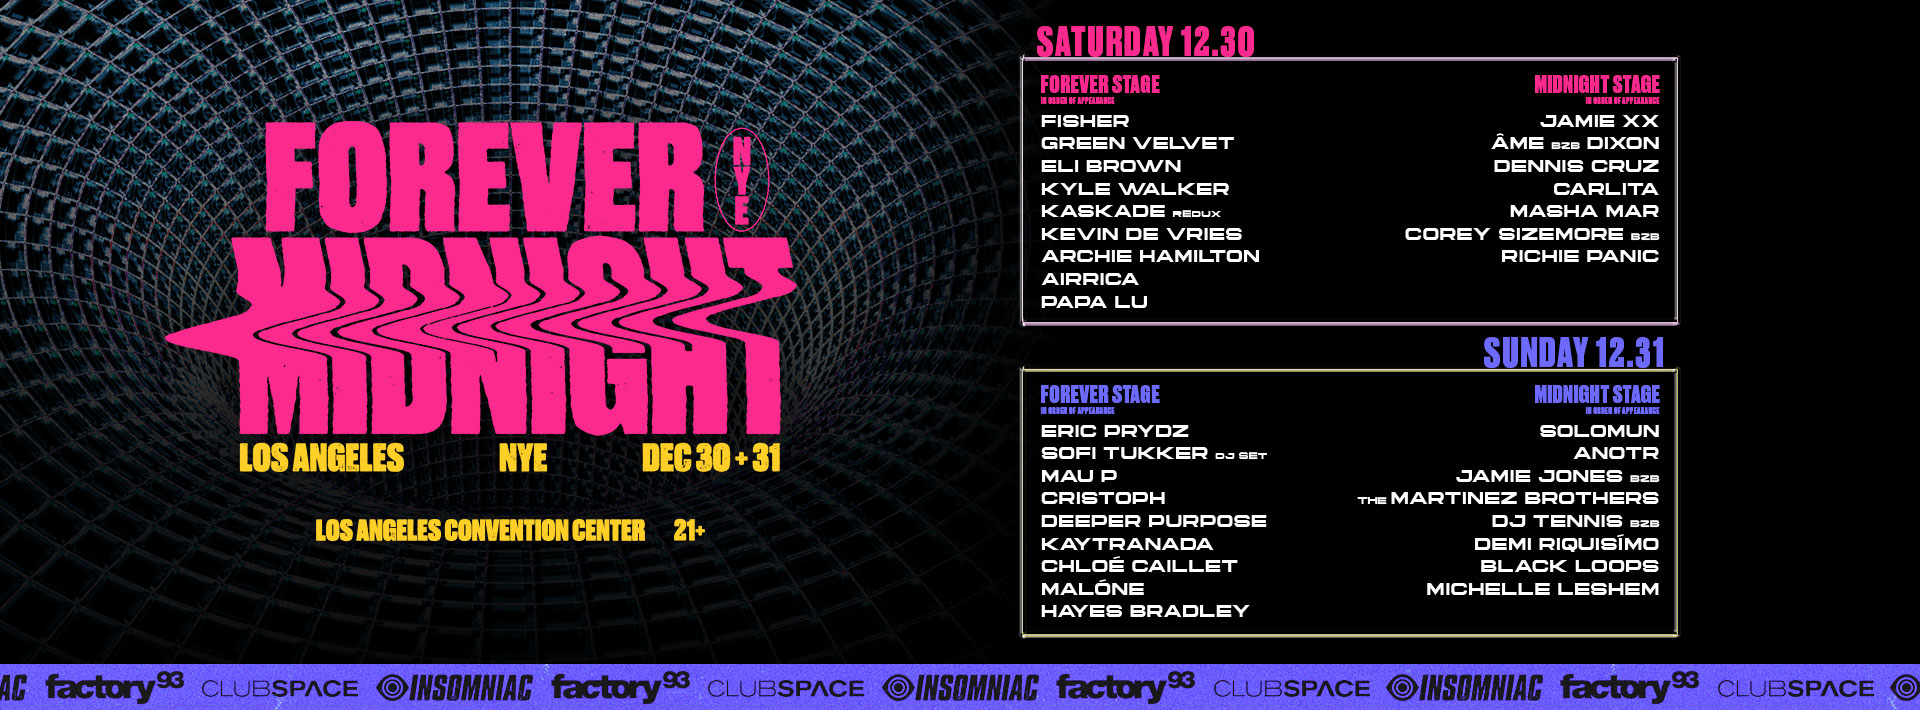 Forever Midnight NYE: Los Angeles